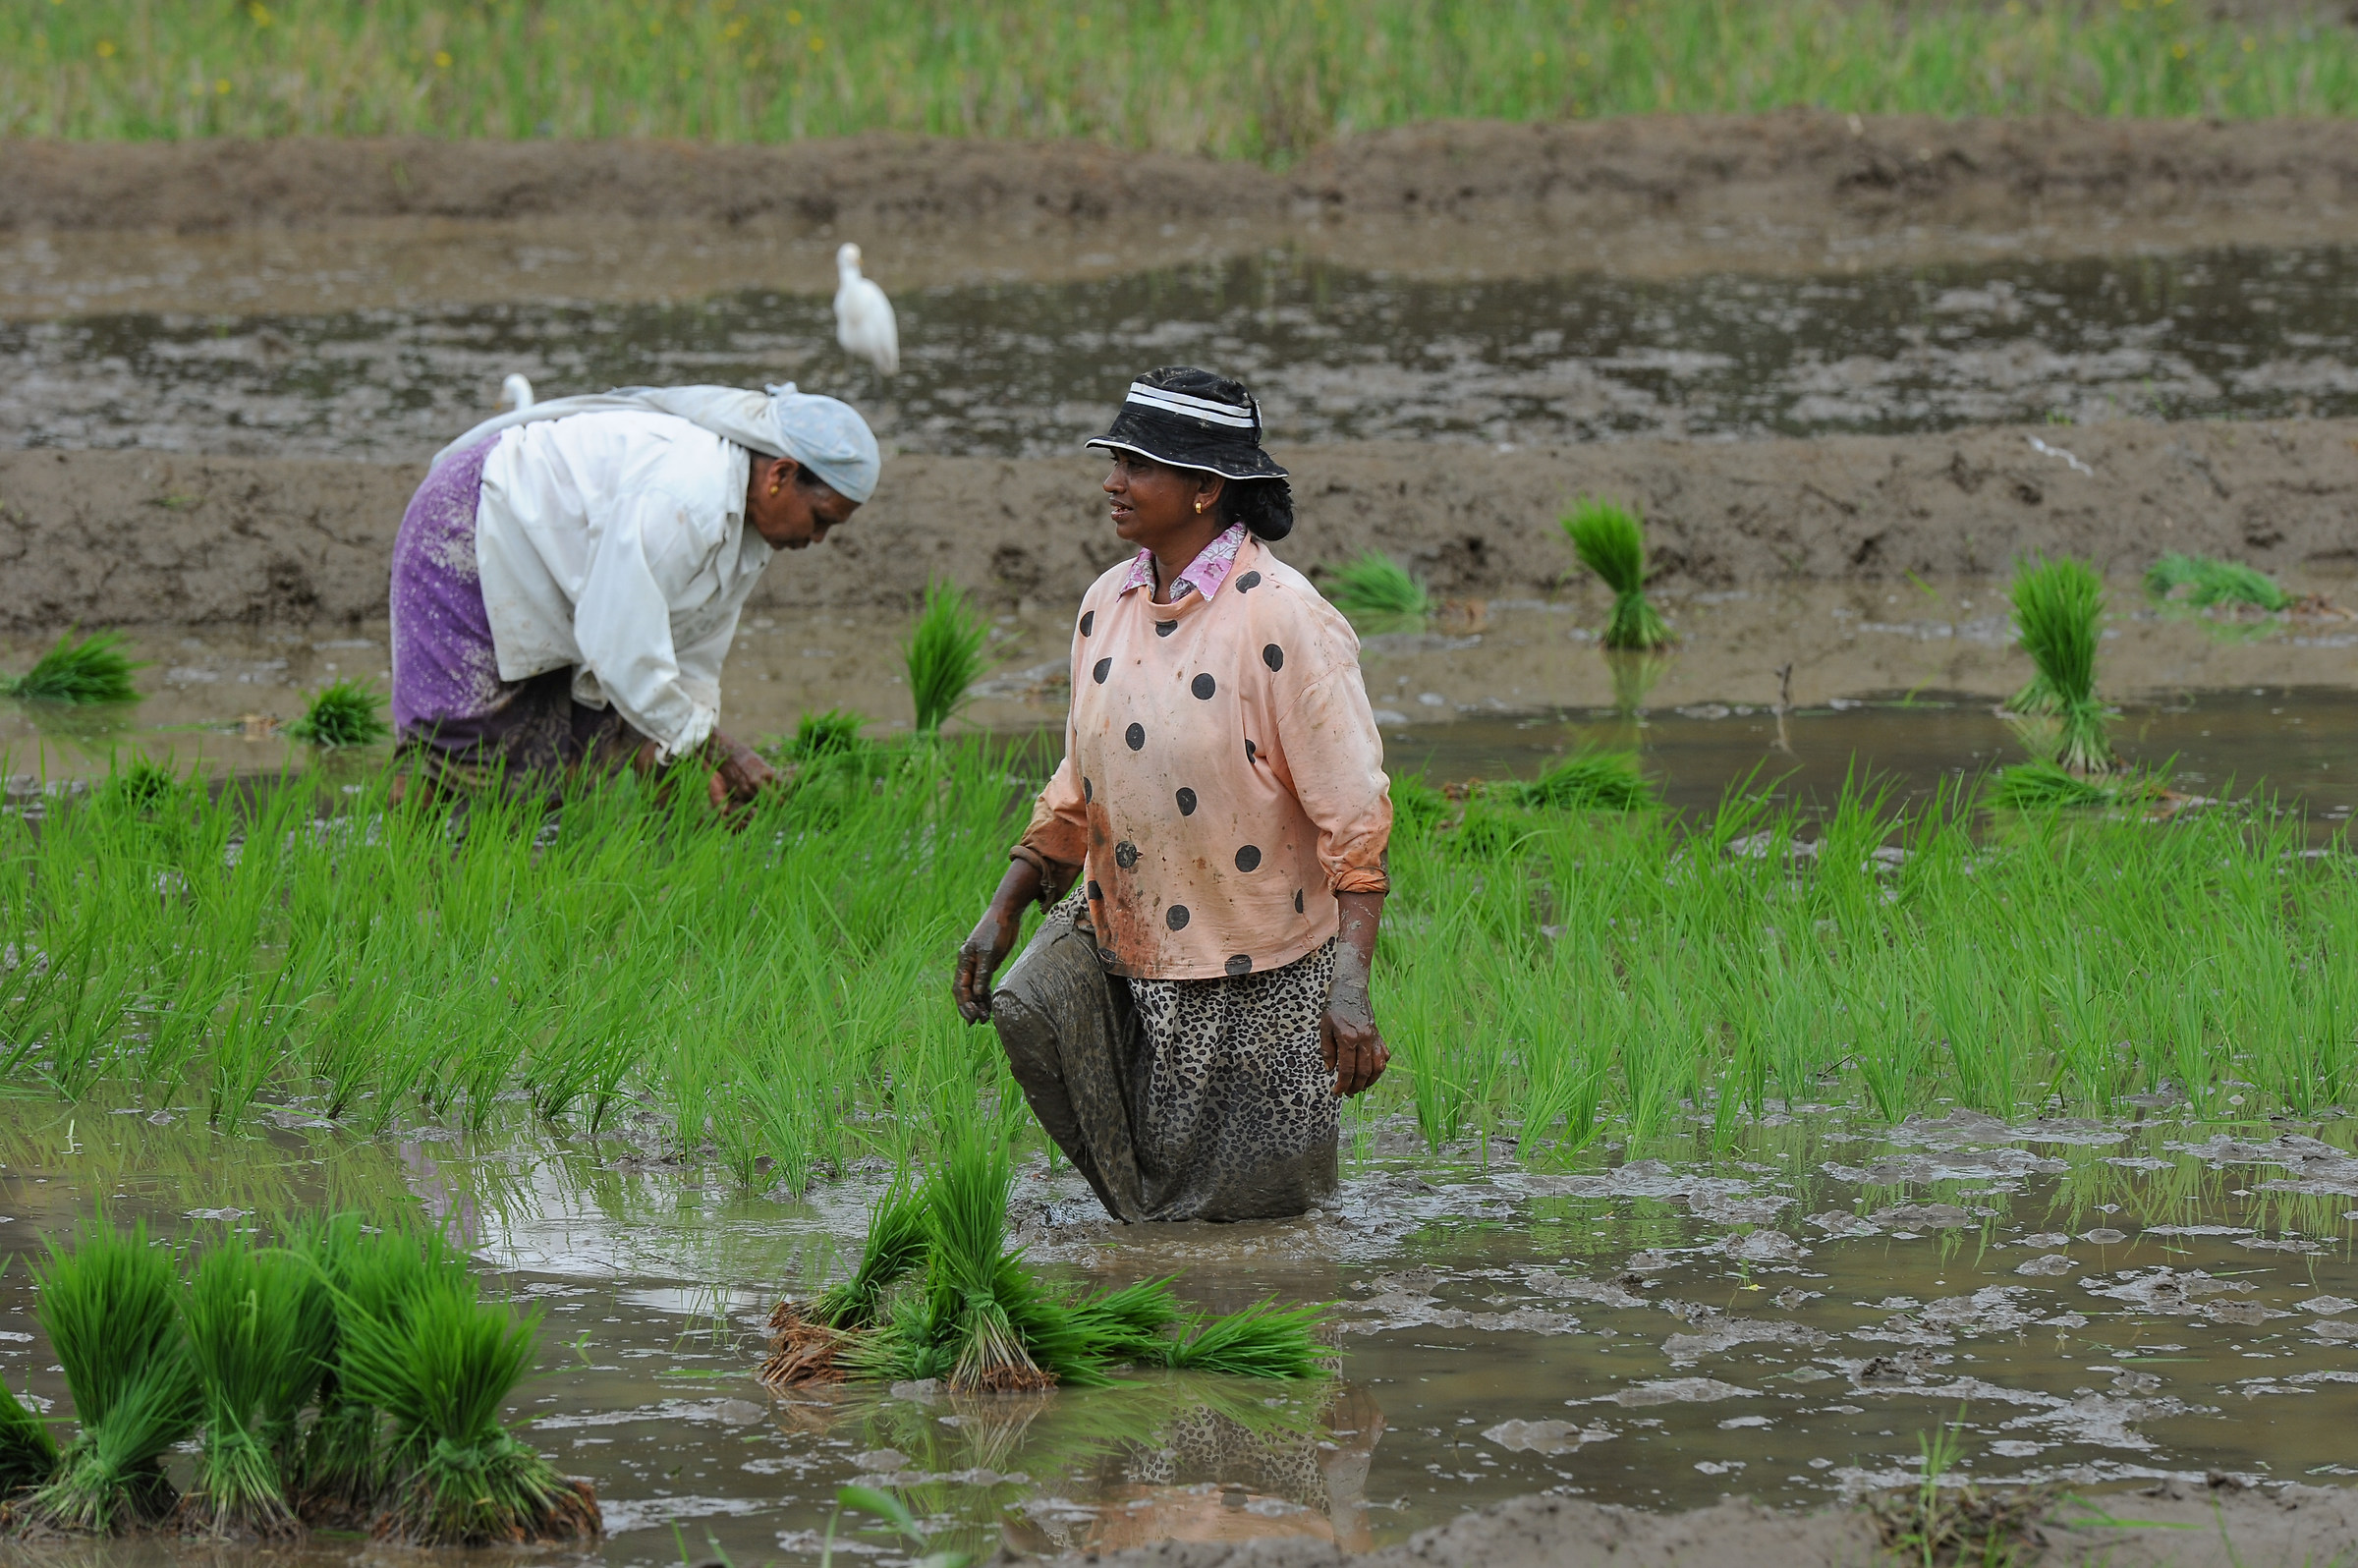 work in the rice fields...